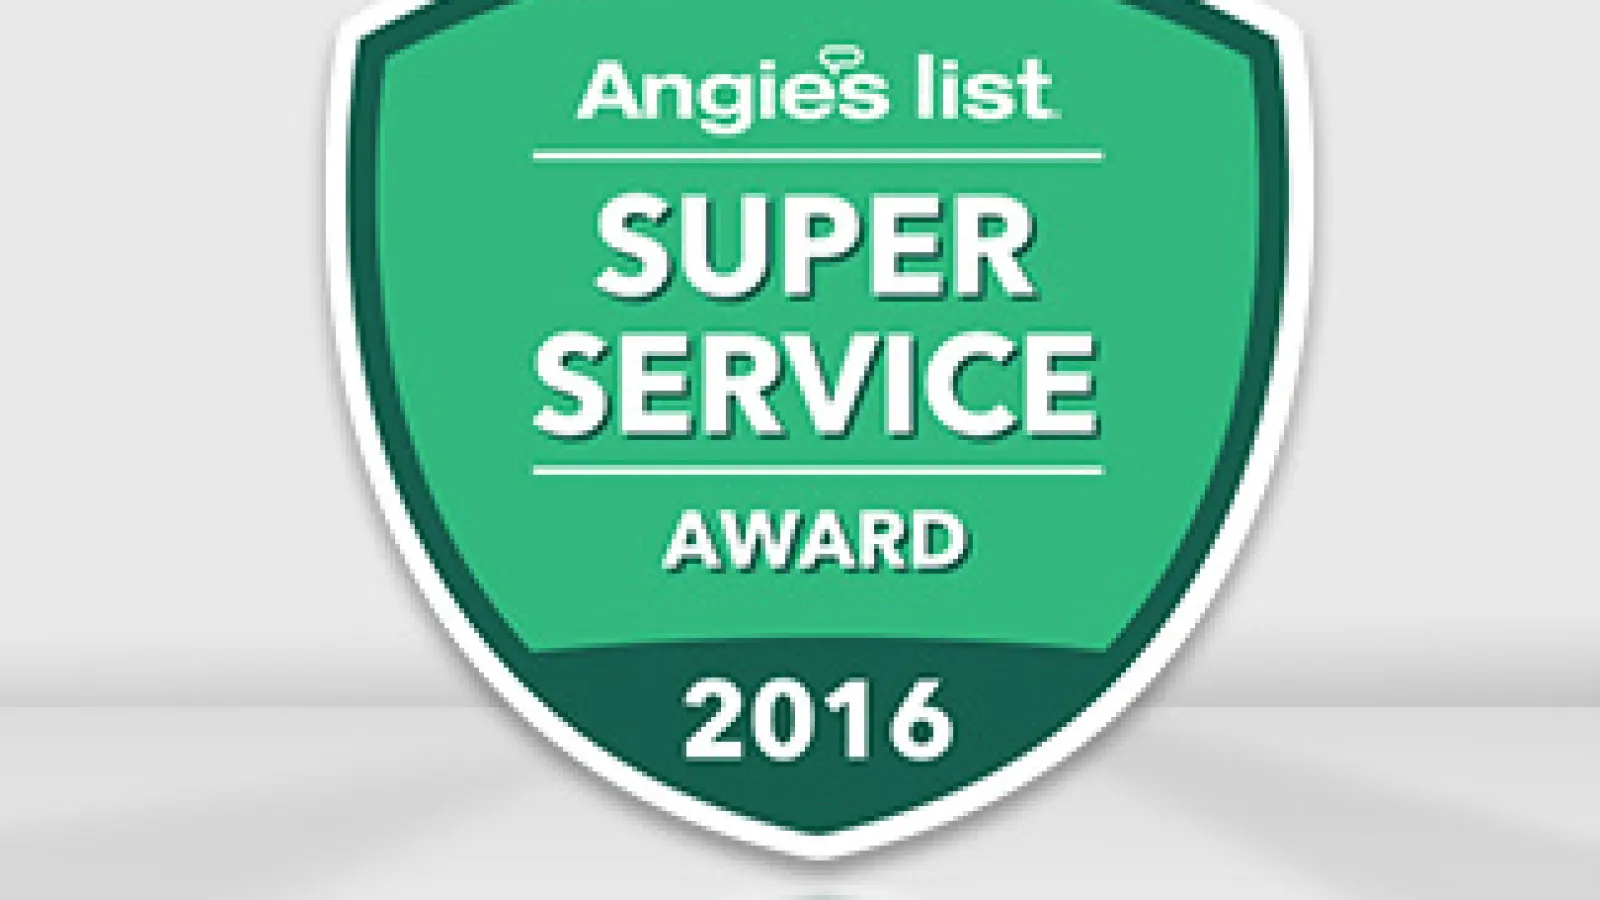 Sir Grout's Franchises are Recognized Once Again by the 2016 Angie's List Super Service Award for Their Unparalleled Work